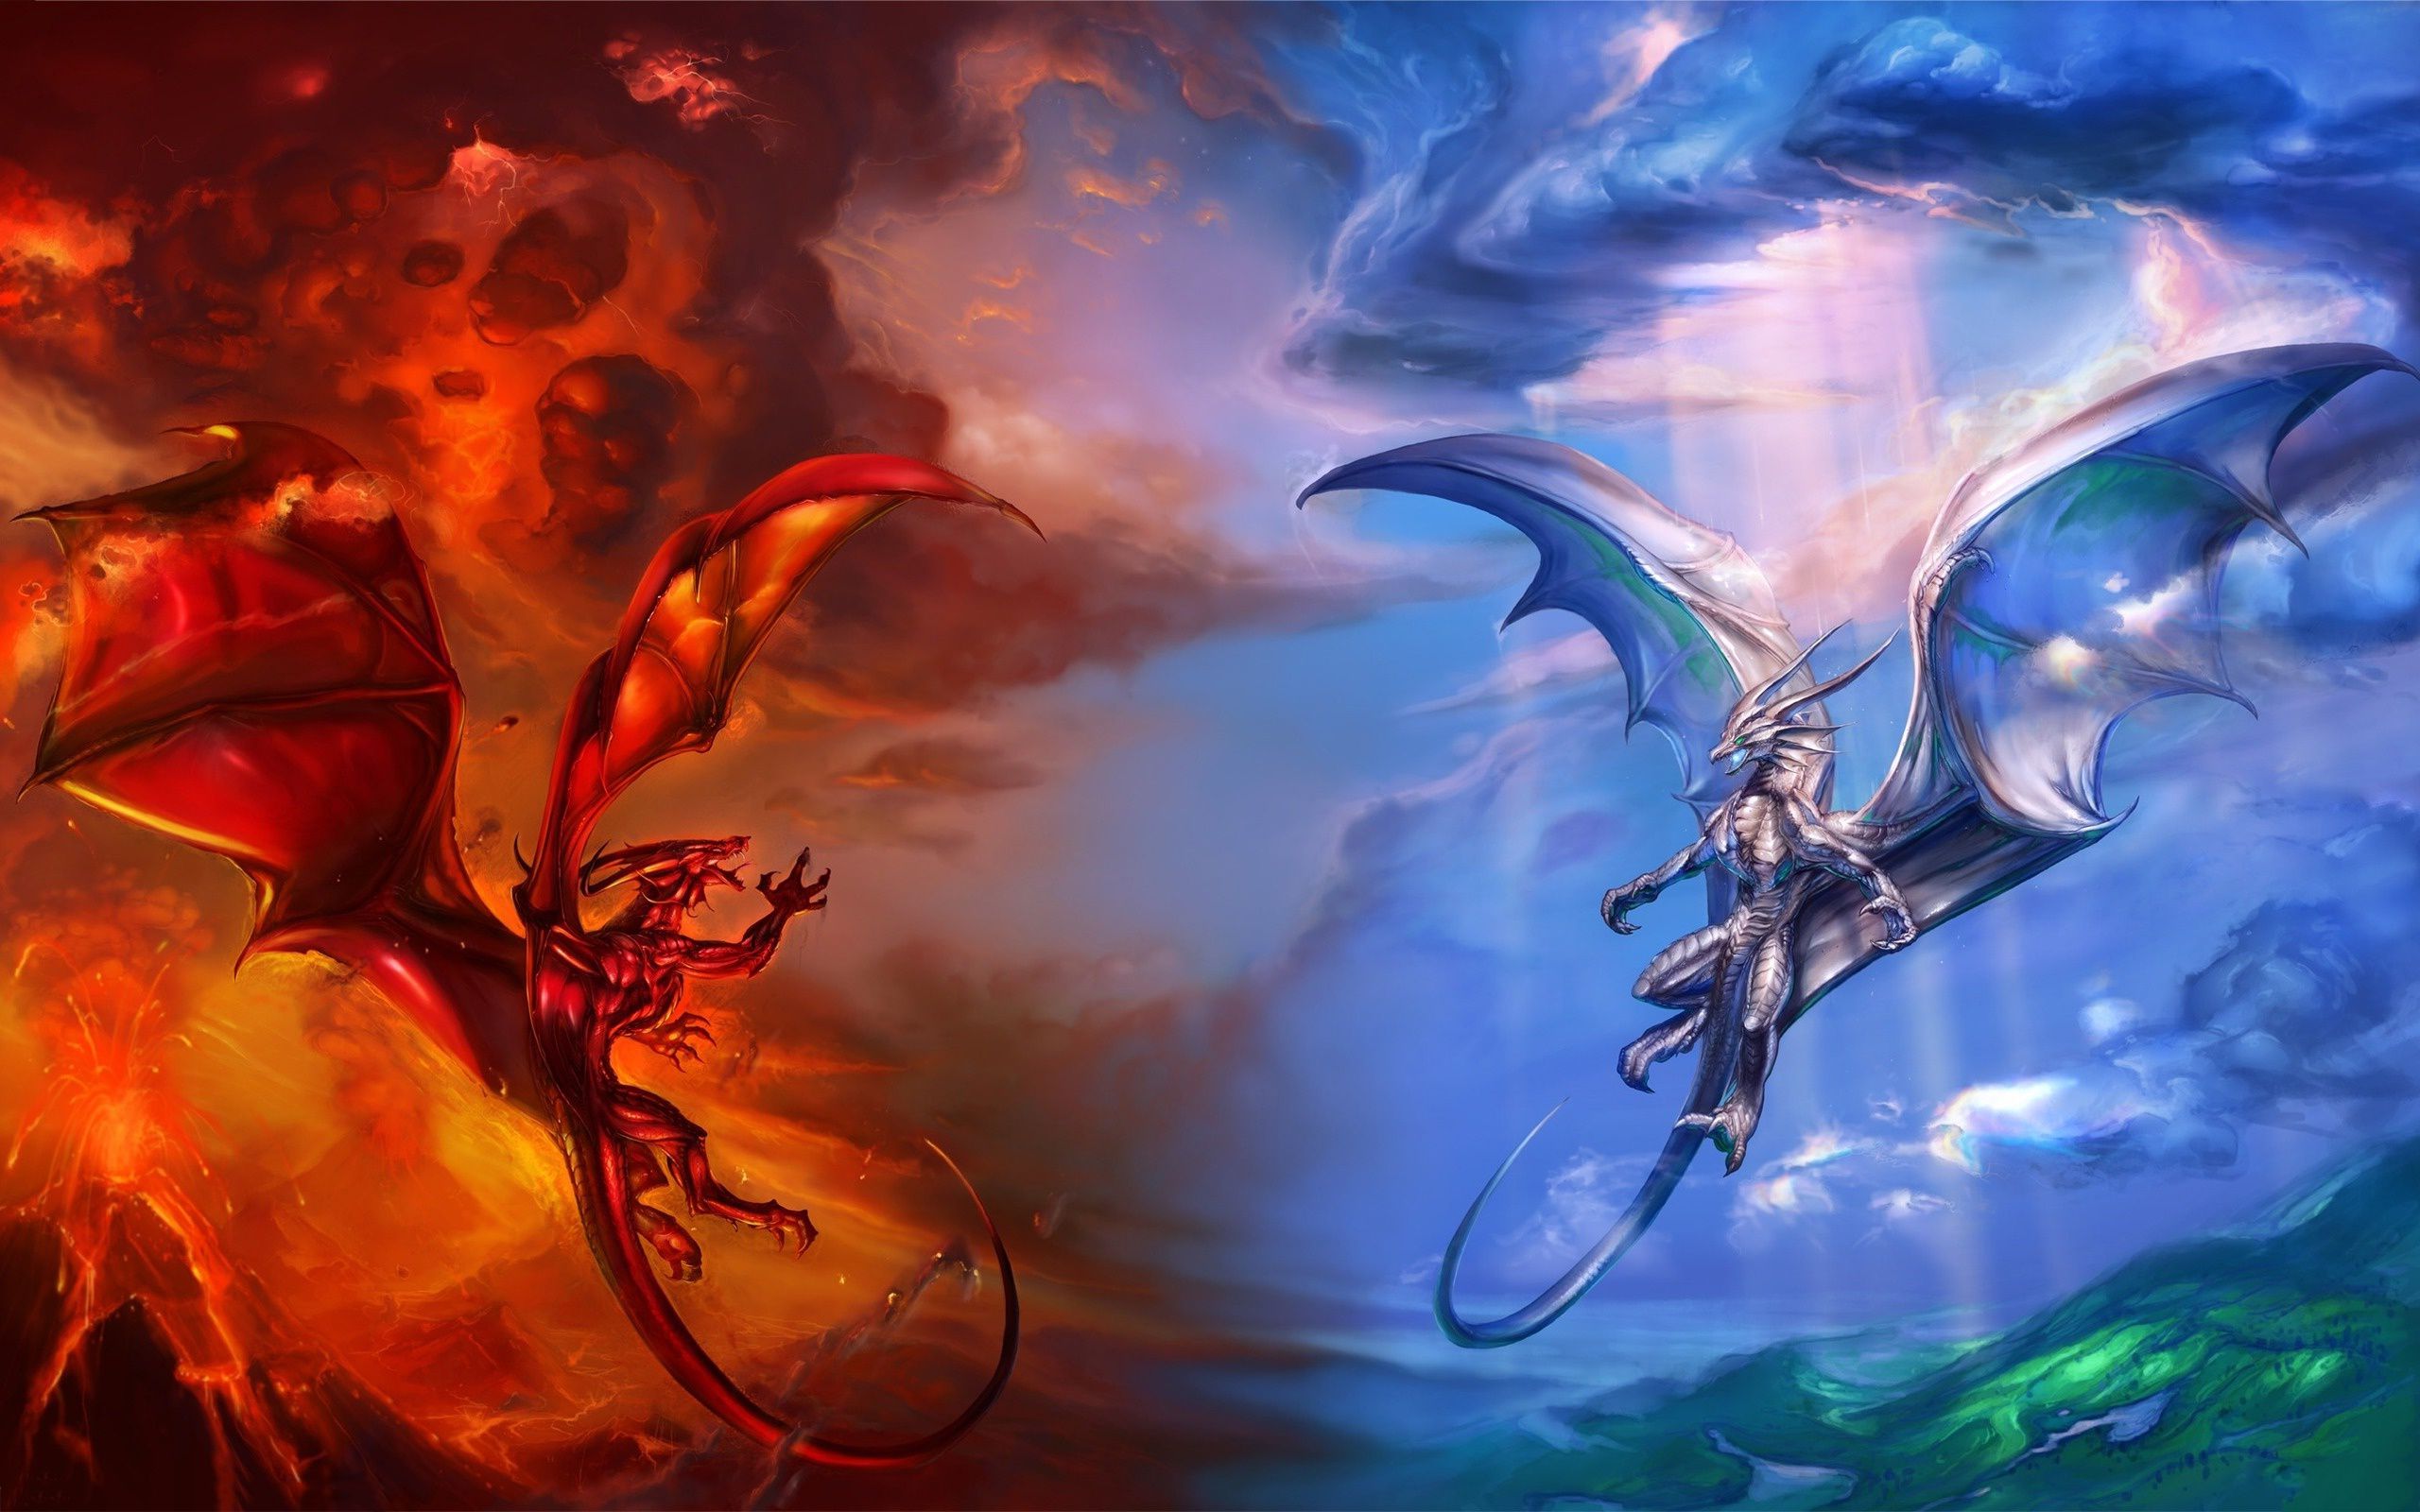 HD wallpaper, Hell, Dragons, Heaven, And